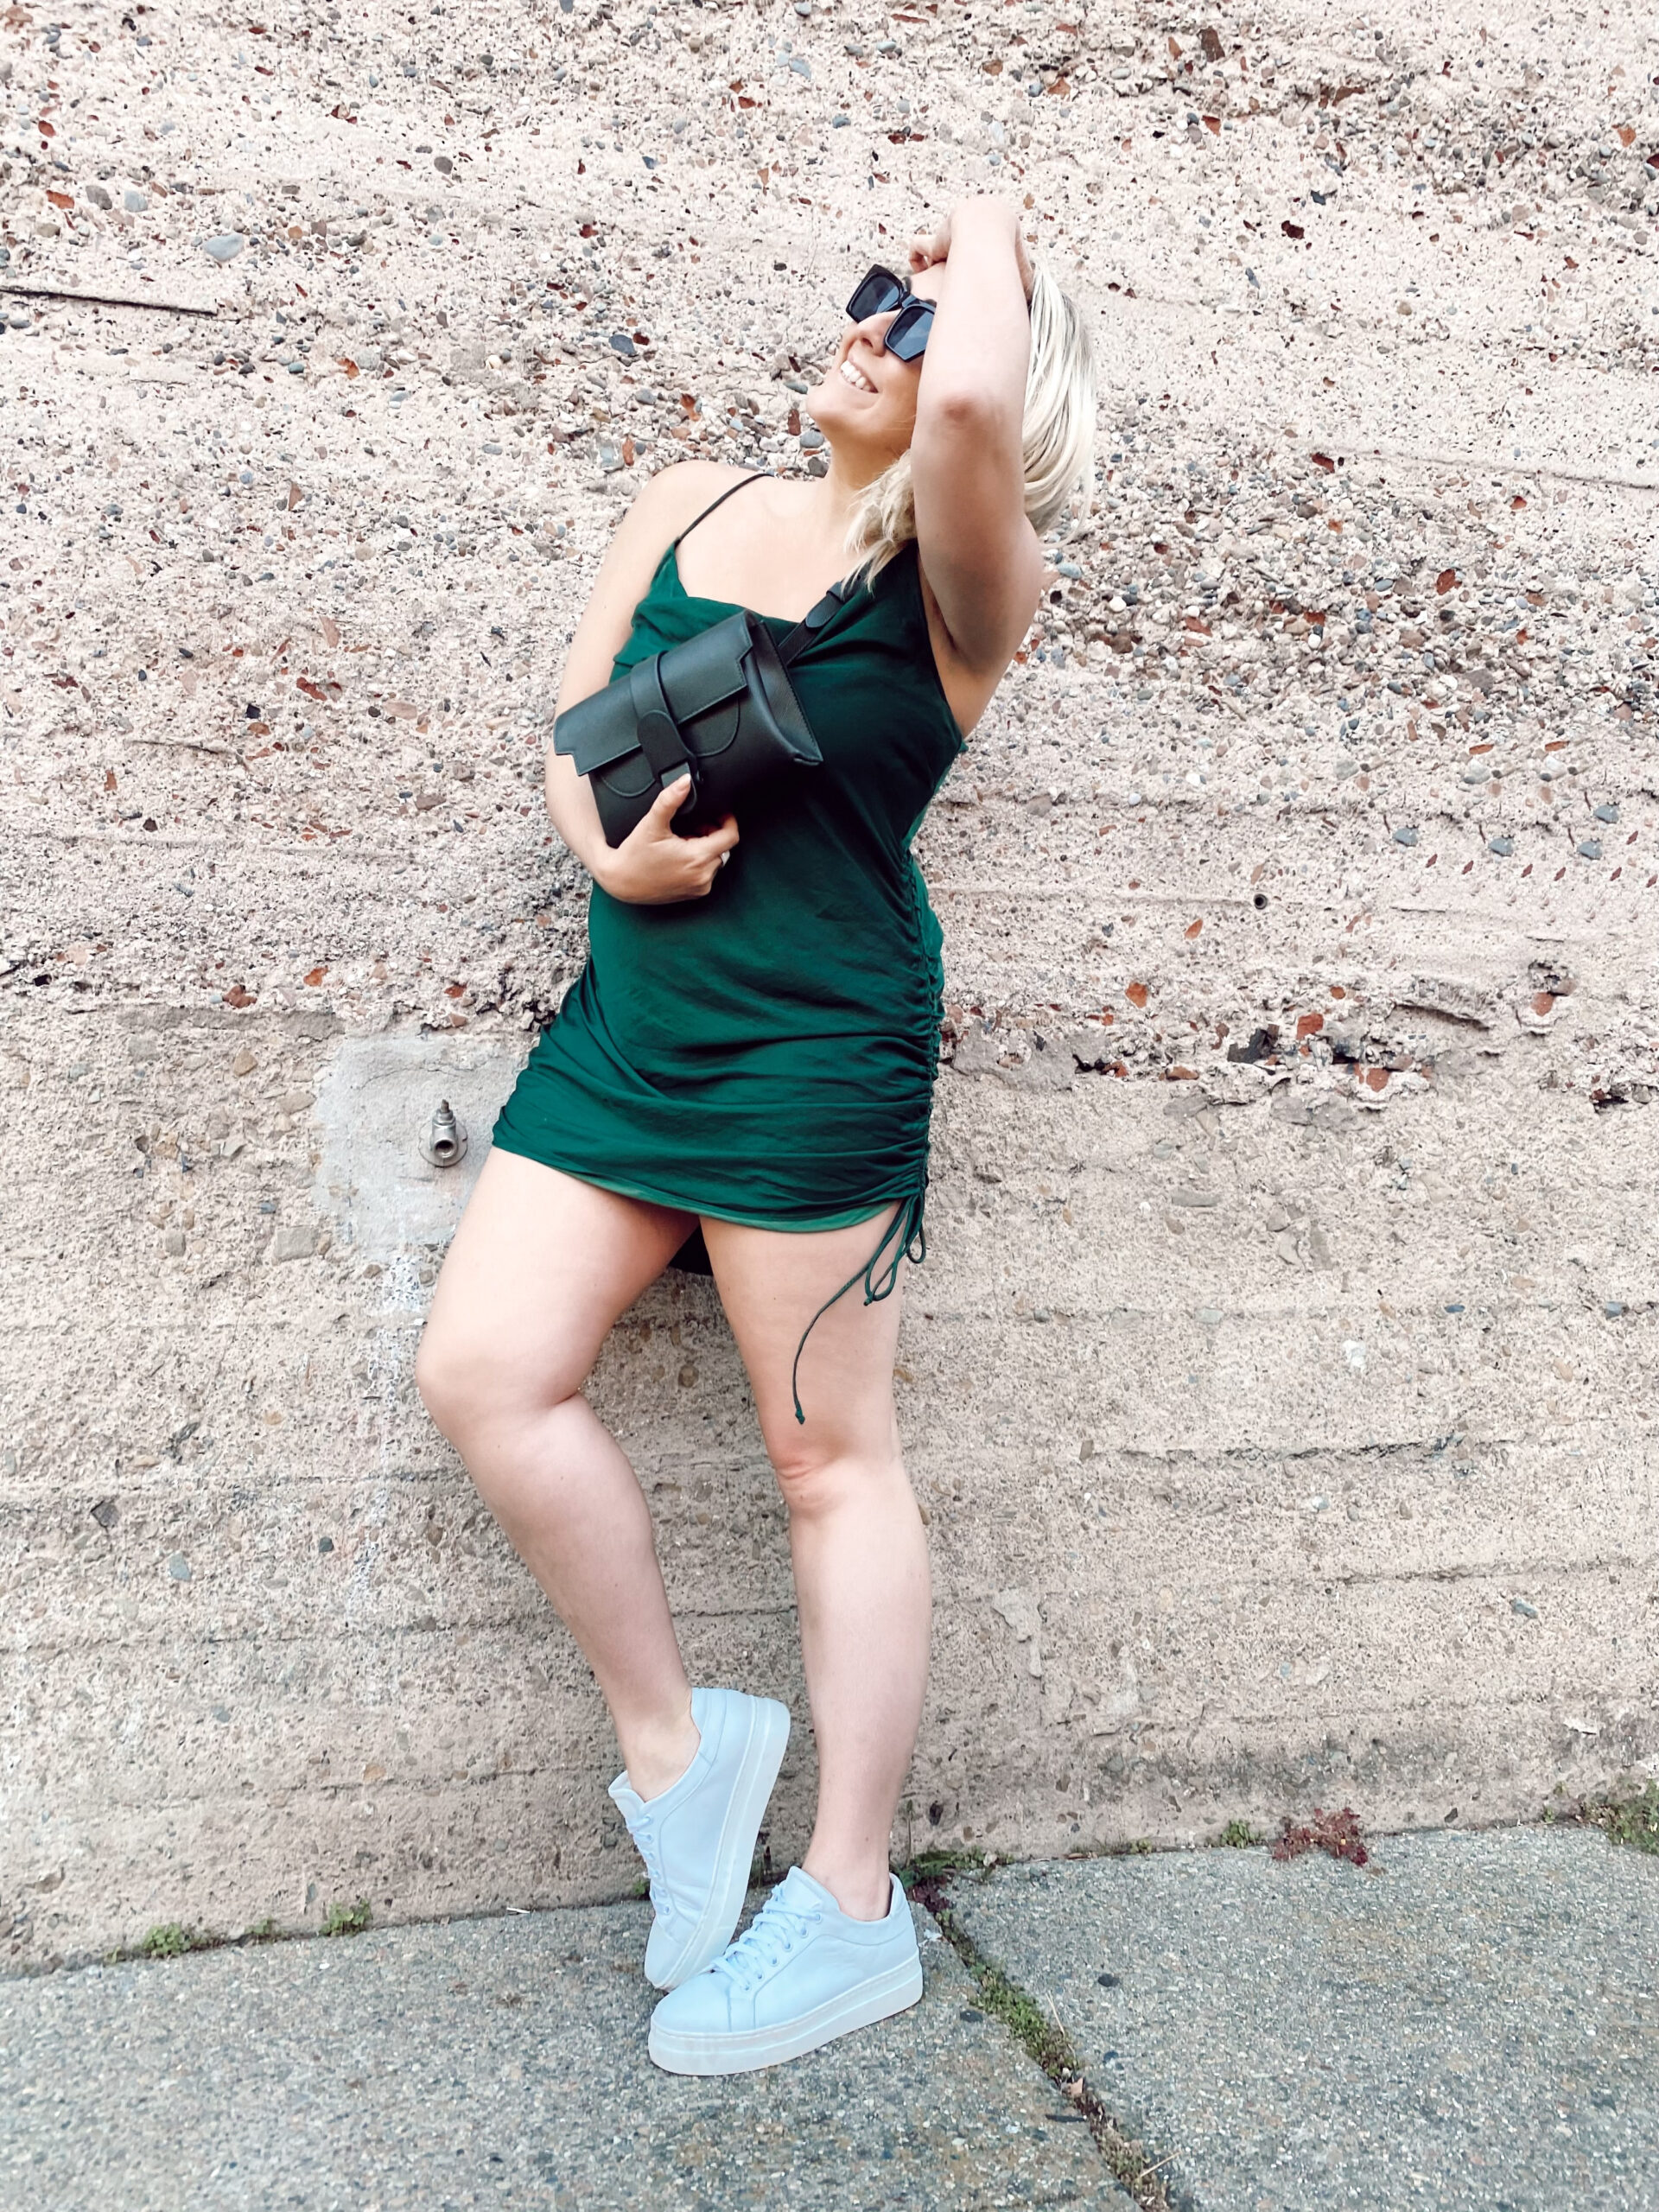 San Francisco fashion and lifestyle blogger KatWalkSF wears the $68 free people slip dress in San Francisco